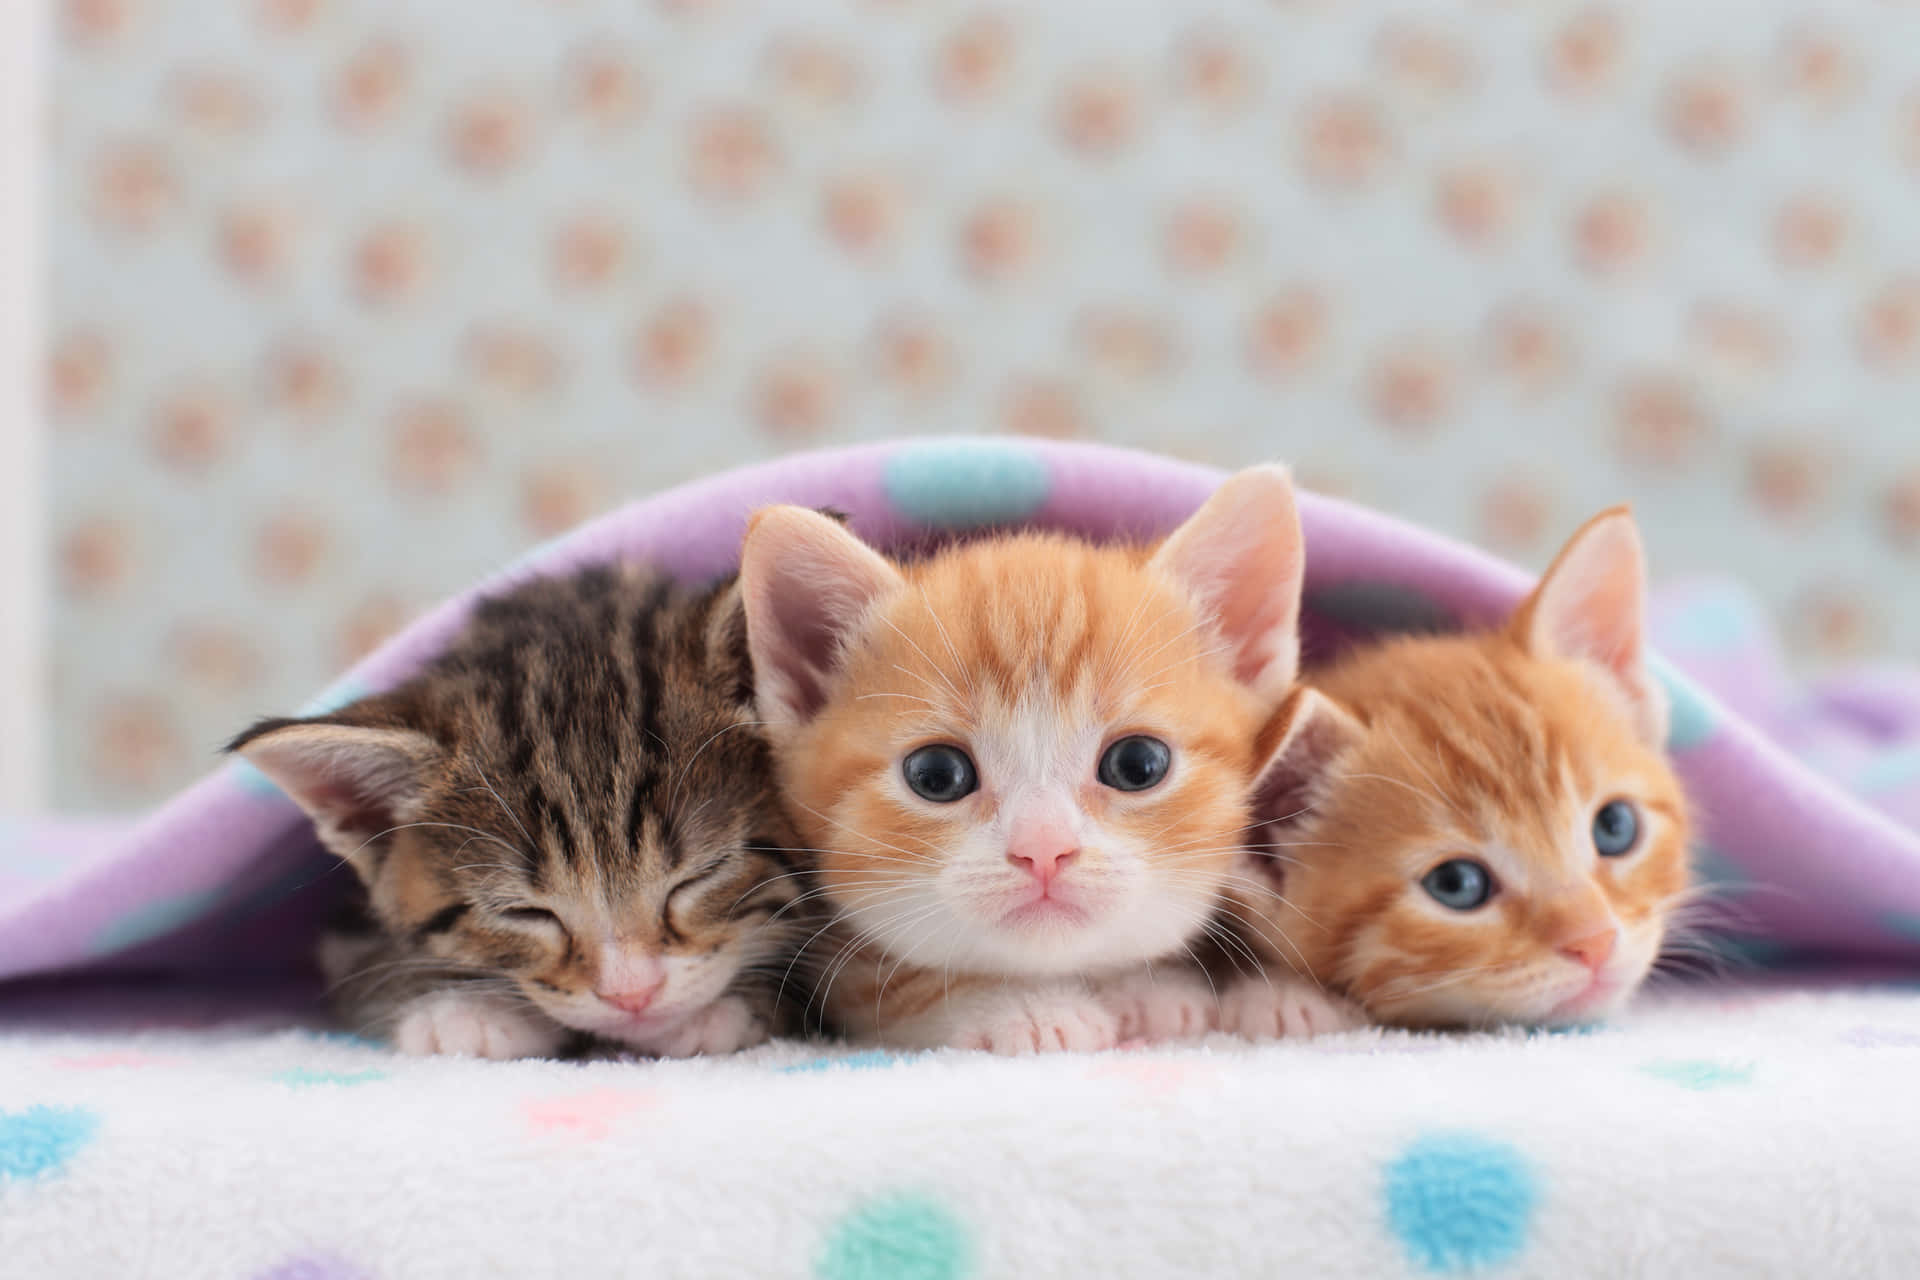 Look At These Cute Kittens!